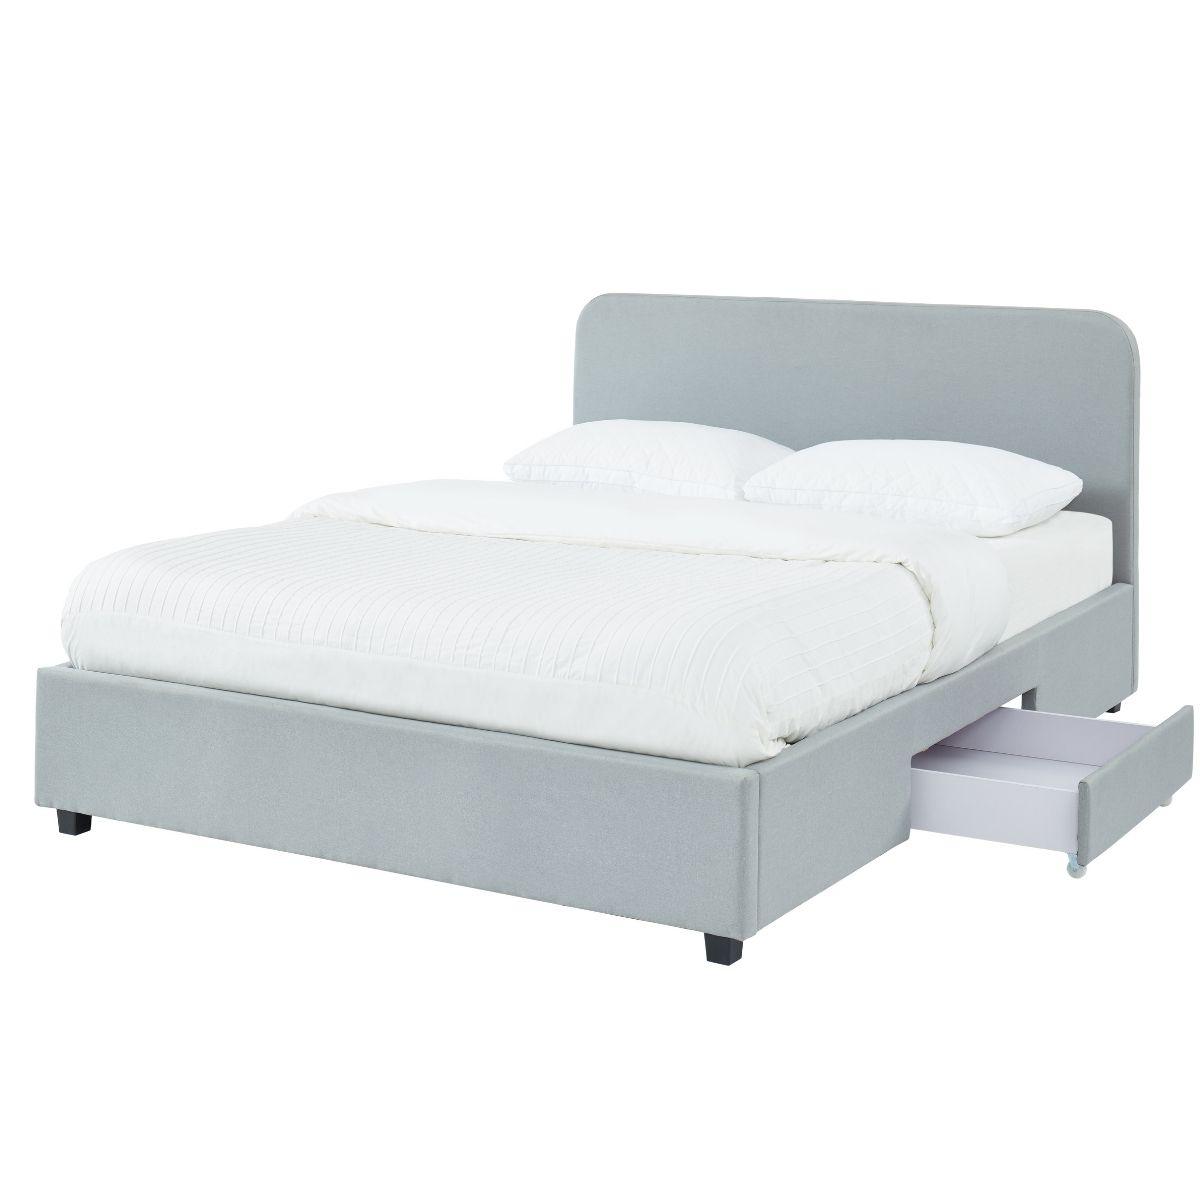 Kevin Stone Grey Storage Bed with 2 Drawers in King